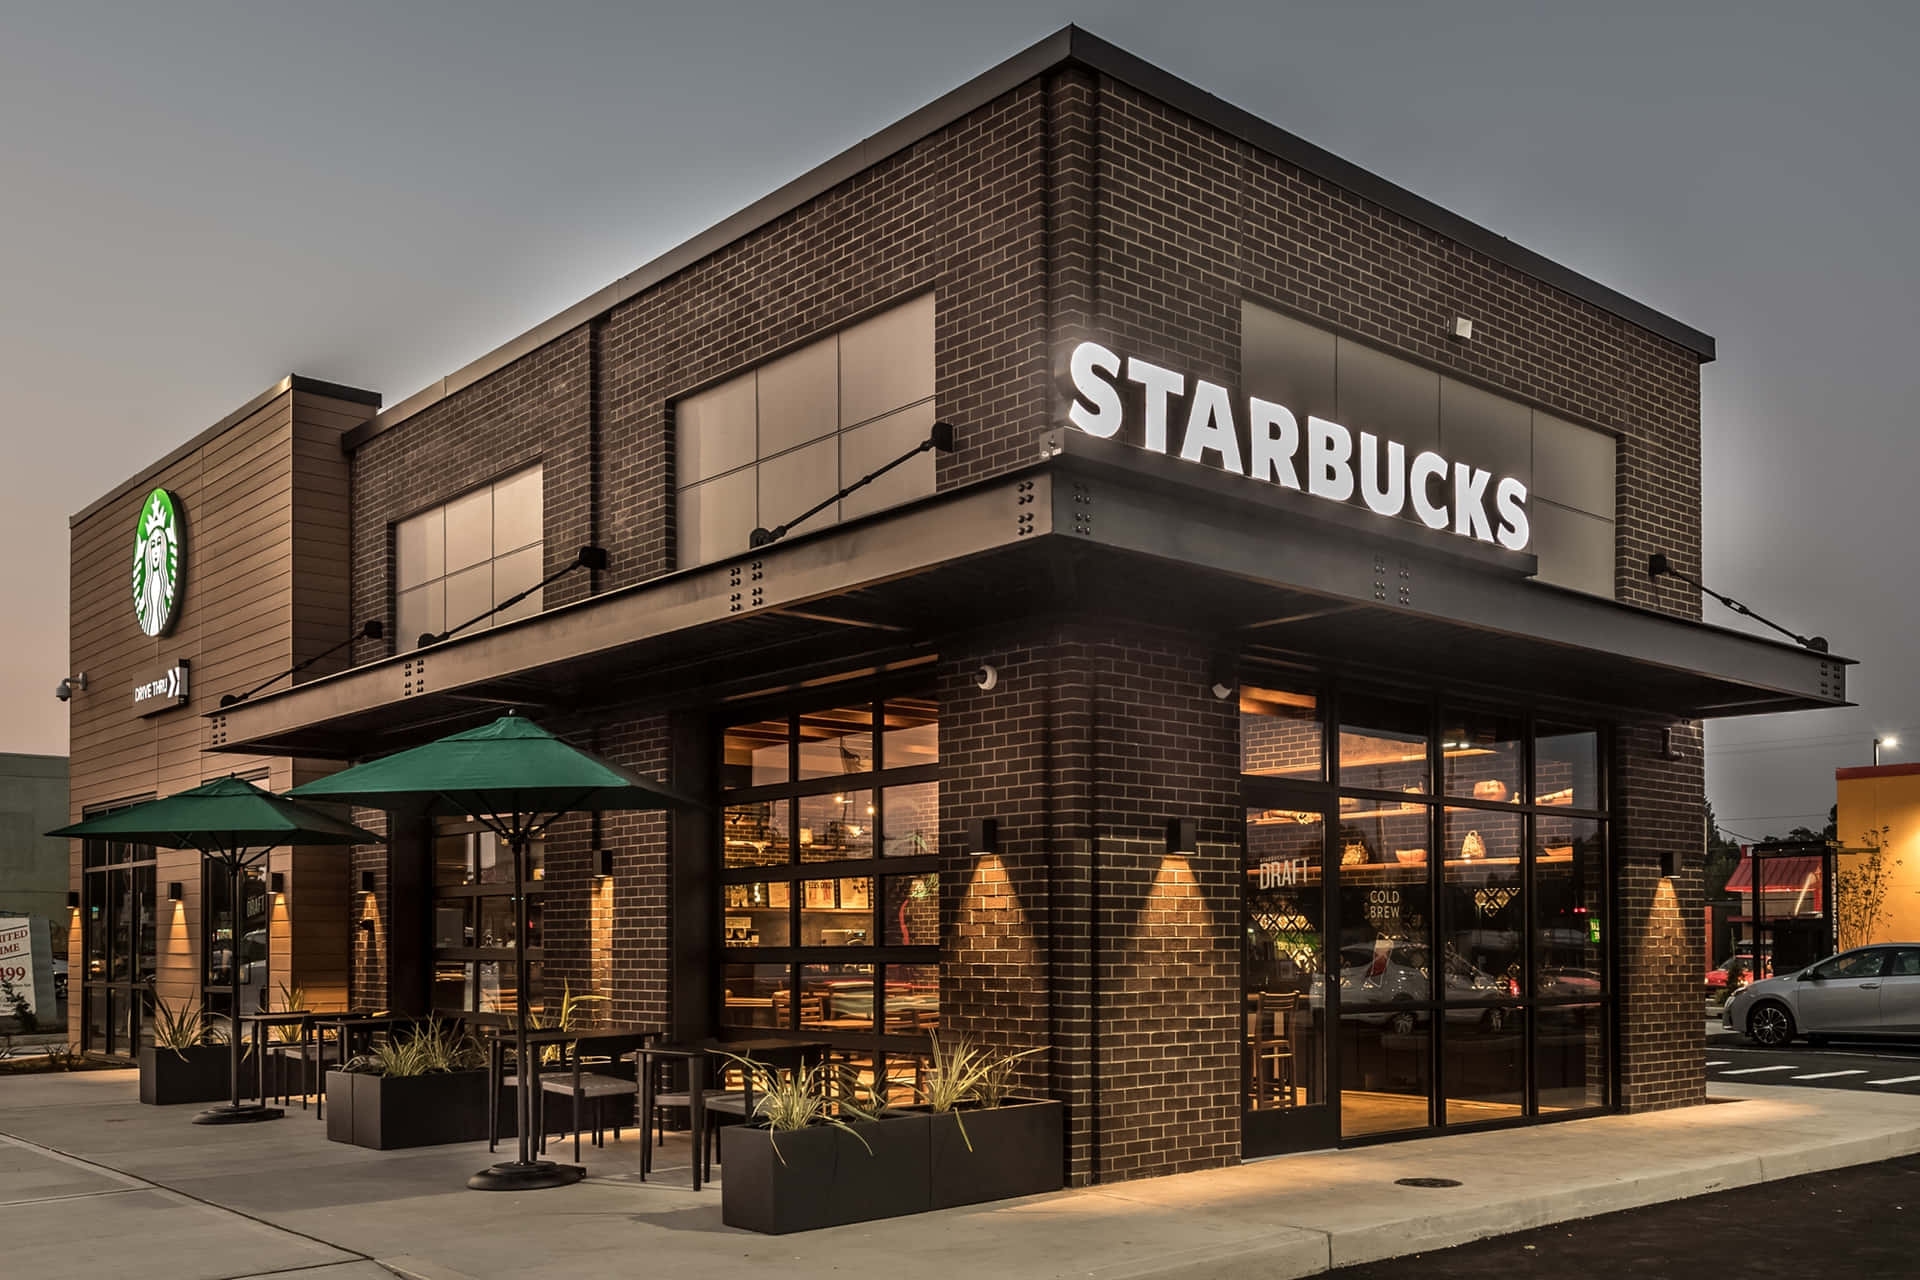 Starbucks - A Building With A Black Exterior